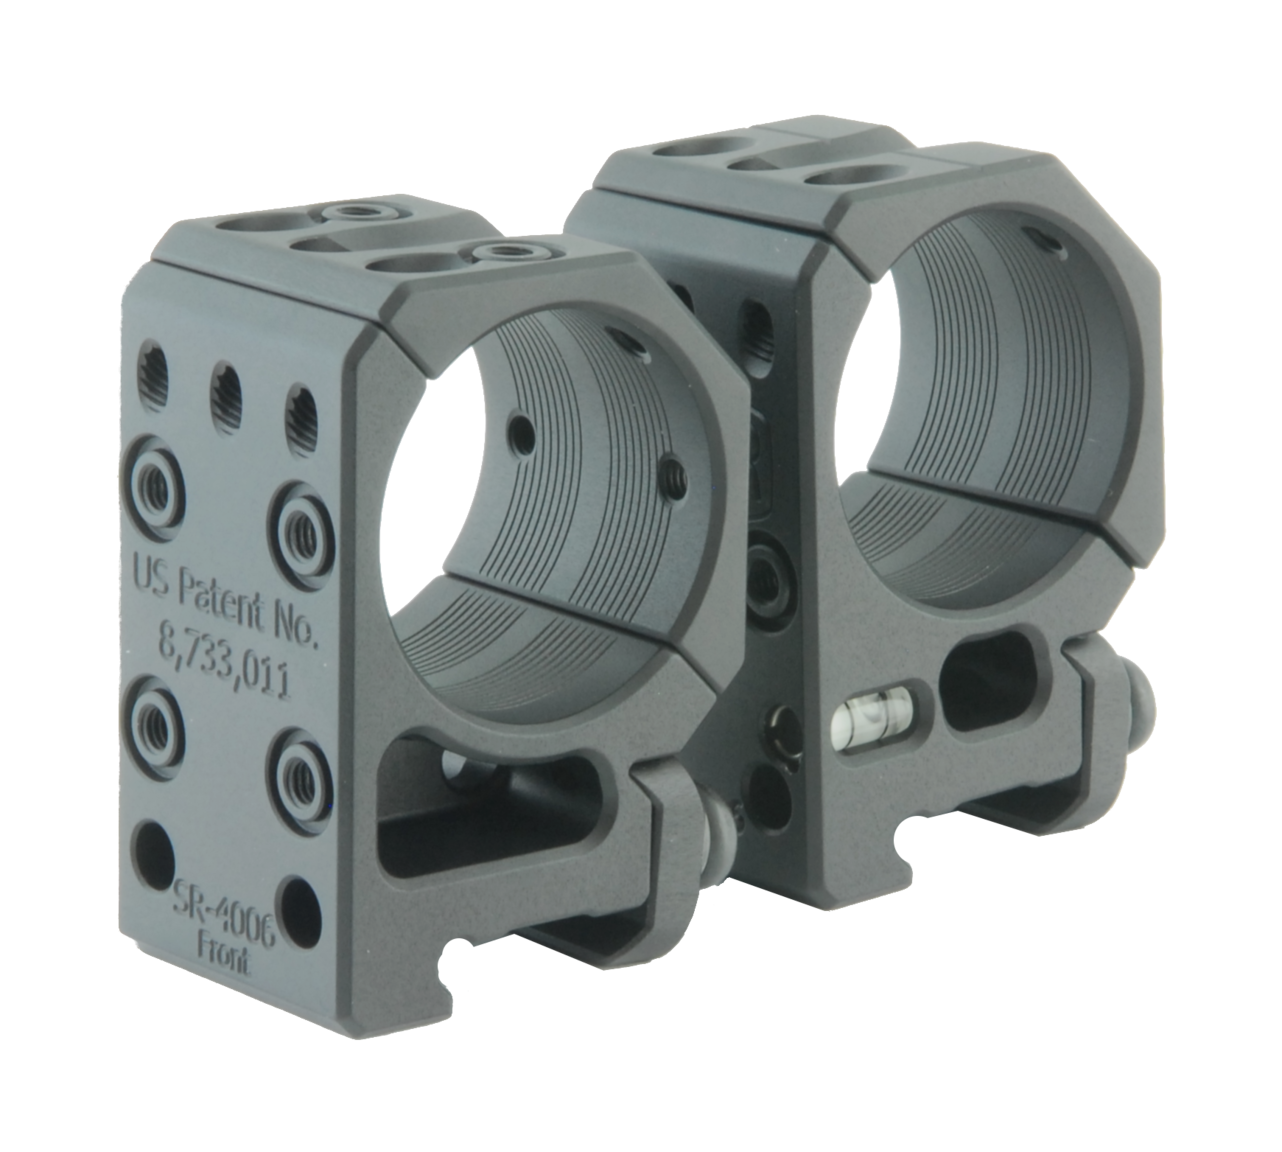 Spuhr ISMS Scope Mount / Rings - SR Separate Picatinny Rings - Australian Tactical Precision